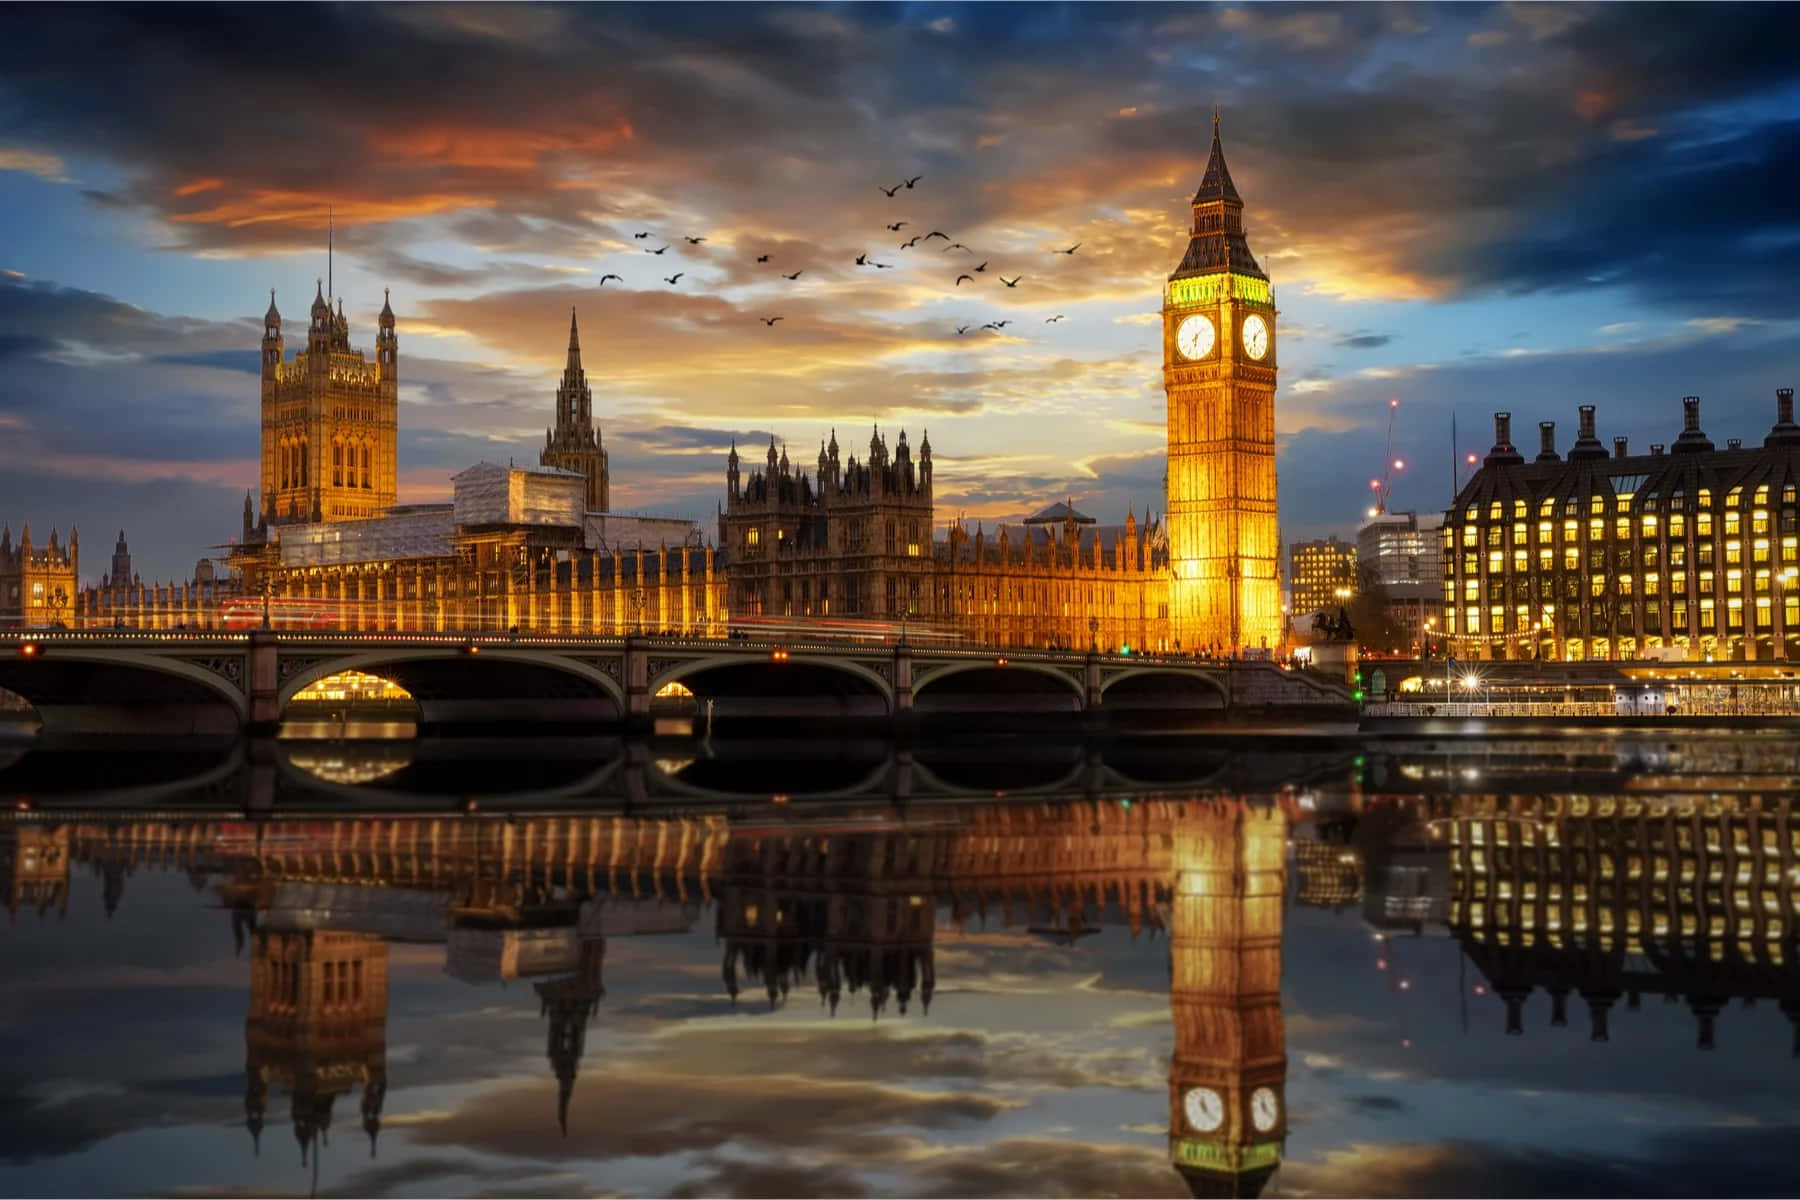 Big Ben And Houses Of Parliament At Sunset In London